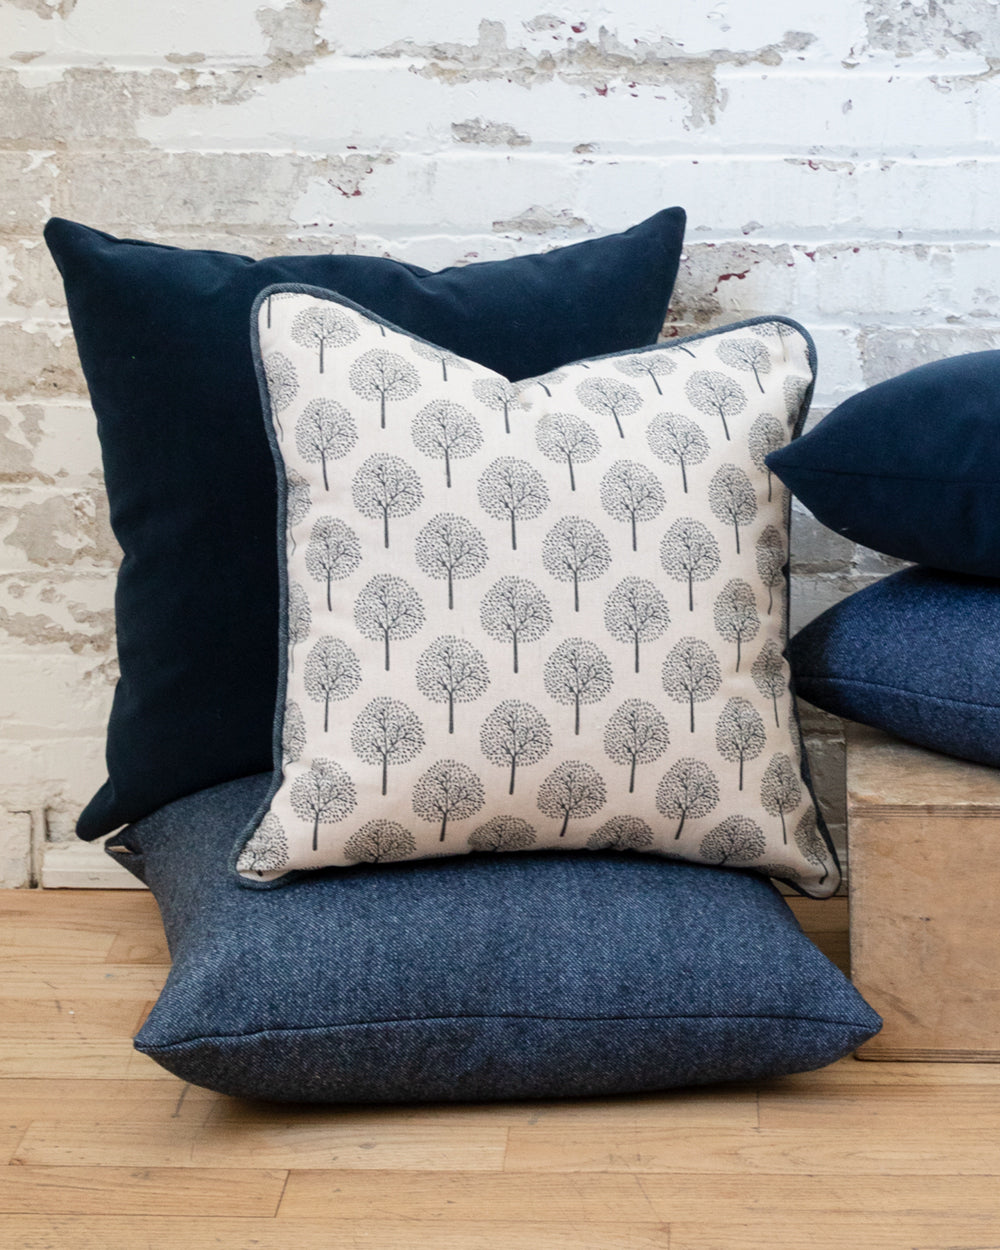 Dark blue and white cotton pillow with tree motif, sitting on complimentary dark blue pillows